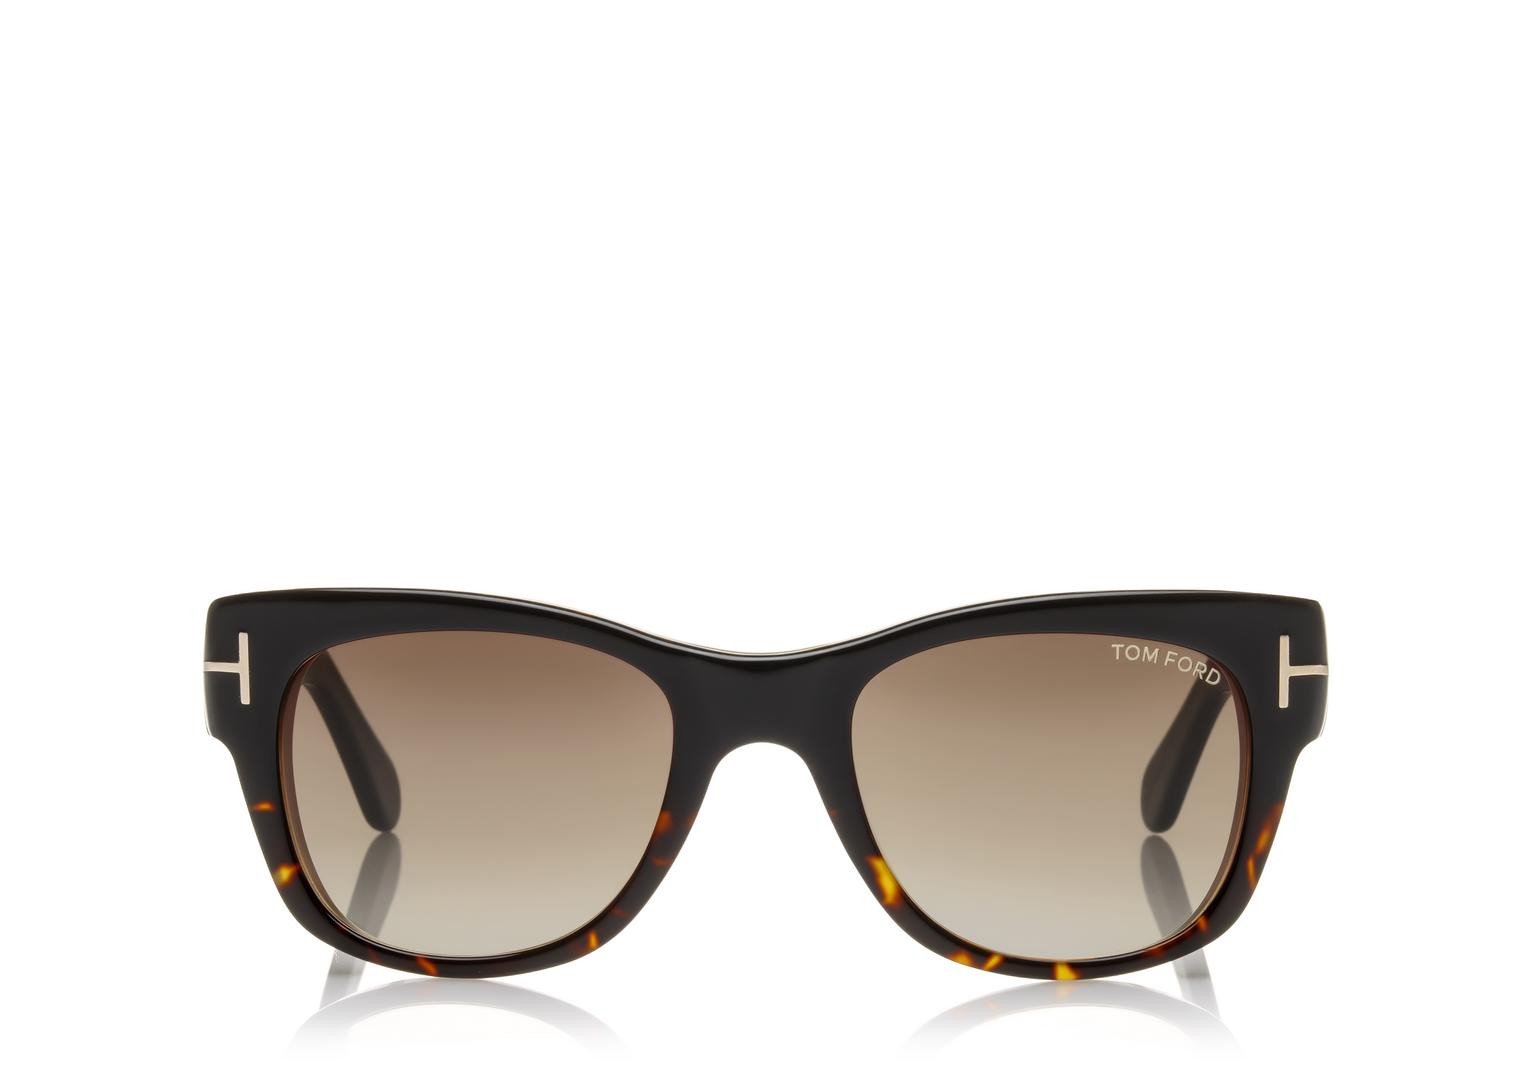 Alexander Daas - Tom Ford Cary FT0058 Sunglasses - Brown Wood - Front View